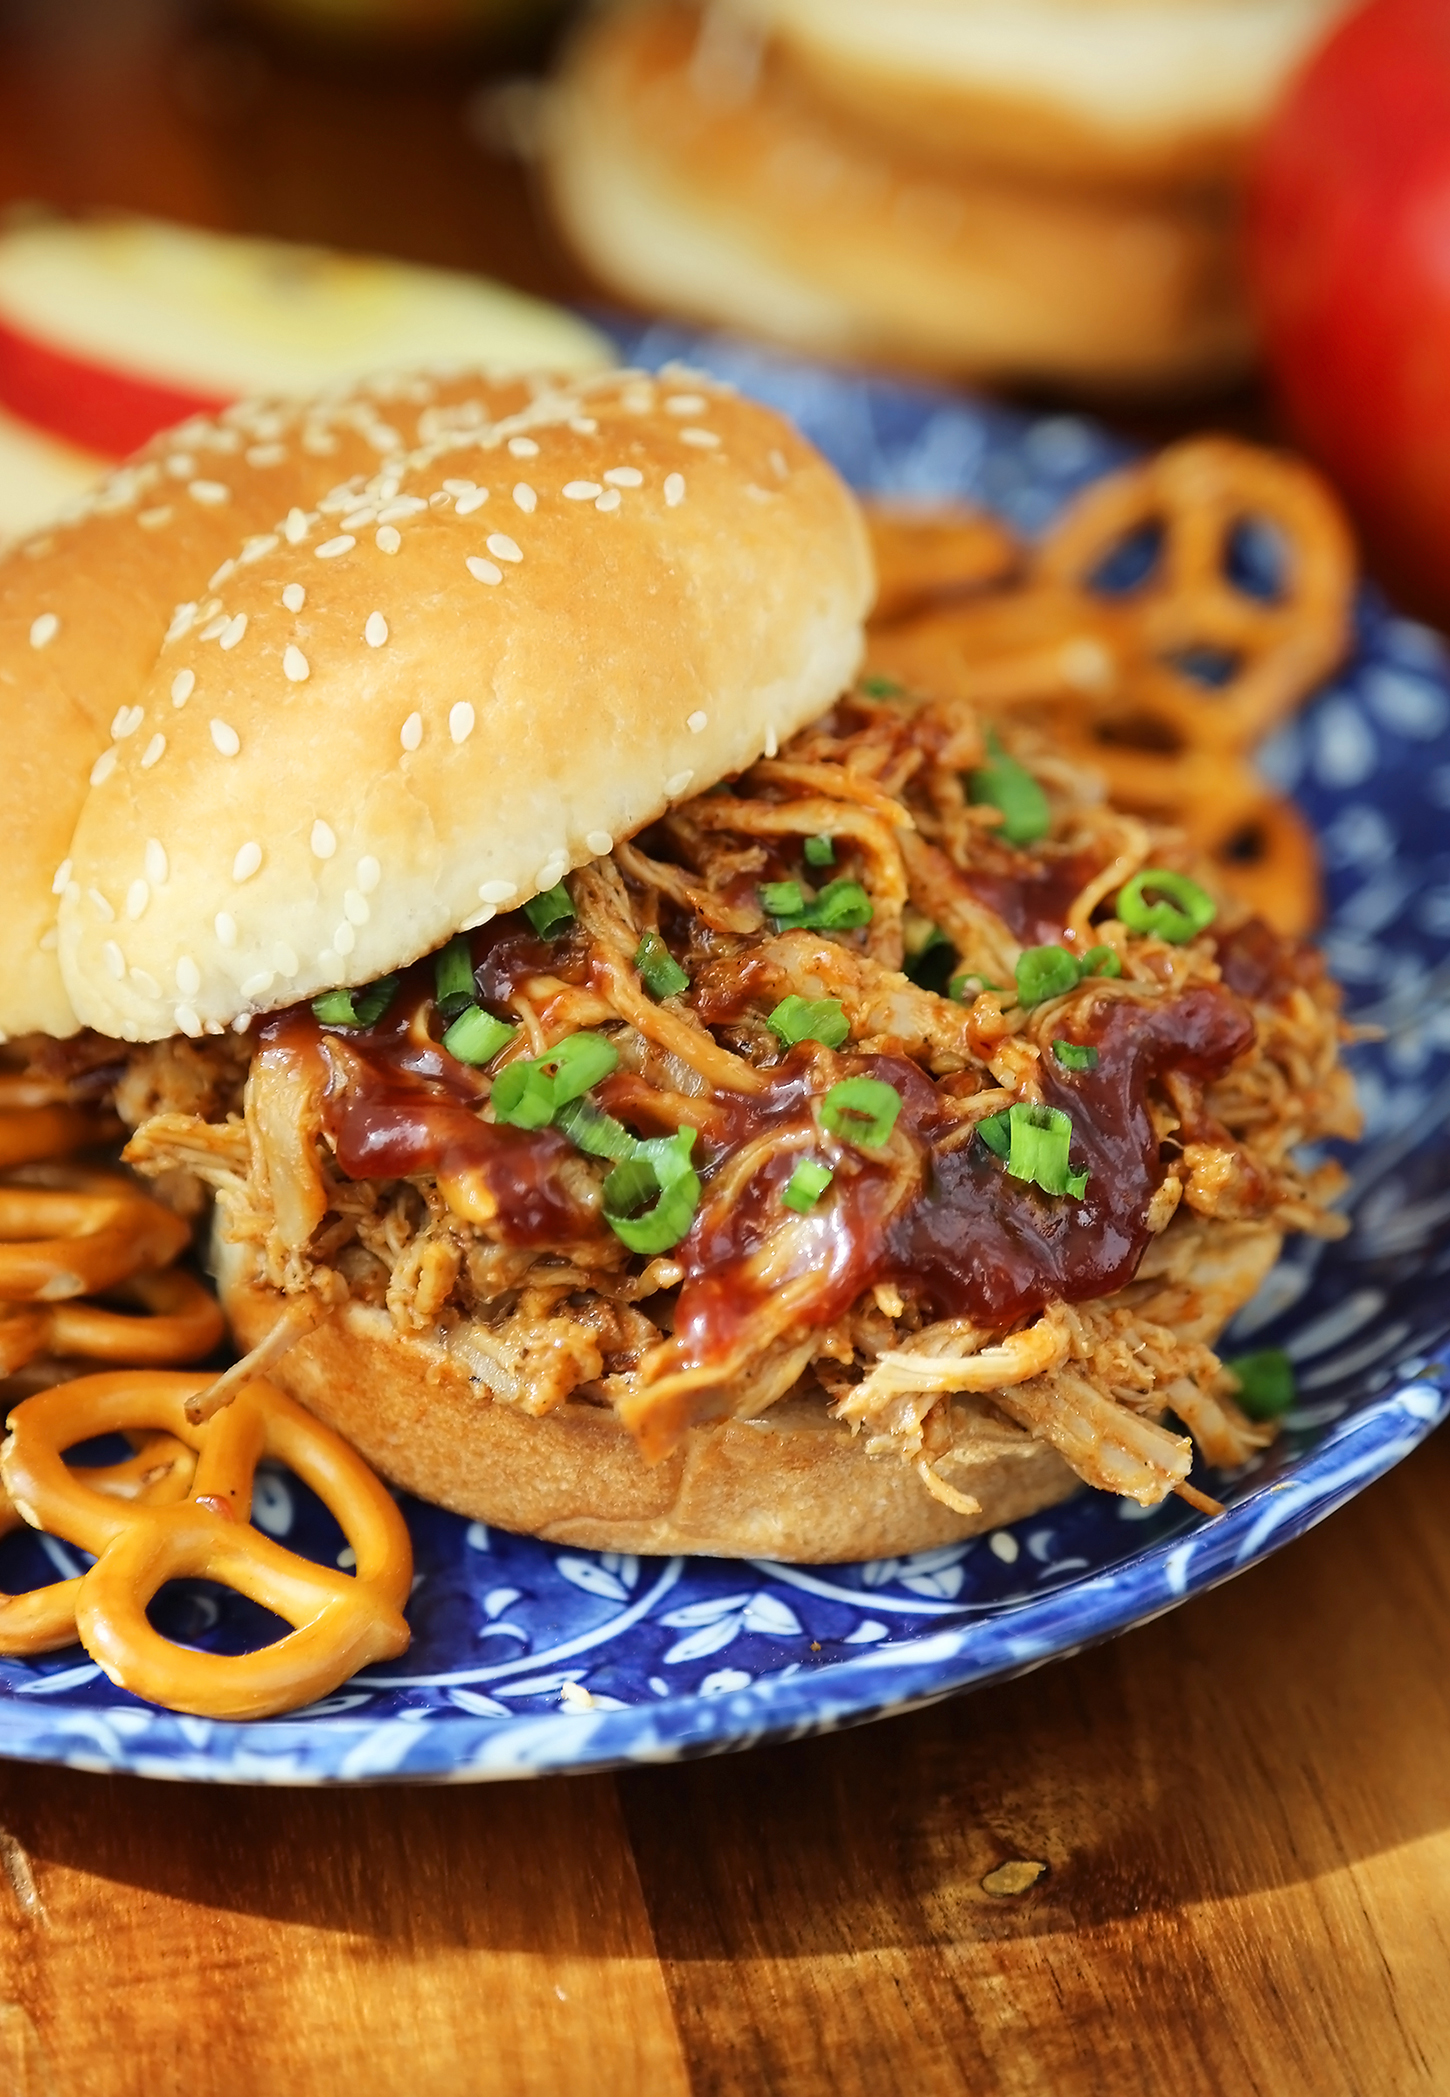 Slow Cooker Apple Cider BBQ Pulled Pork - Our best-ever pulled pork with a tangy, sweet apple cider BBQ sauce! Perfect slow cooker food for weeknight dinners or hungry crowds. thecomfortofcooking.com